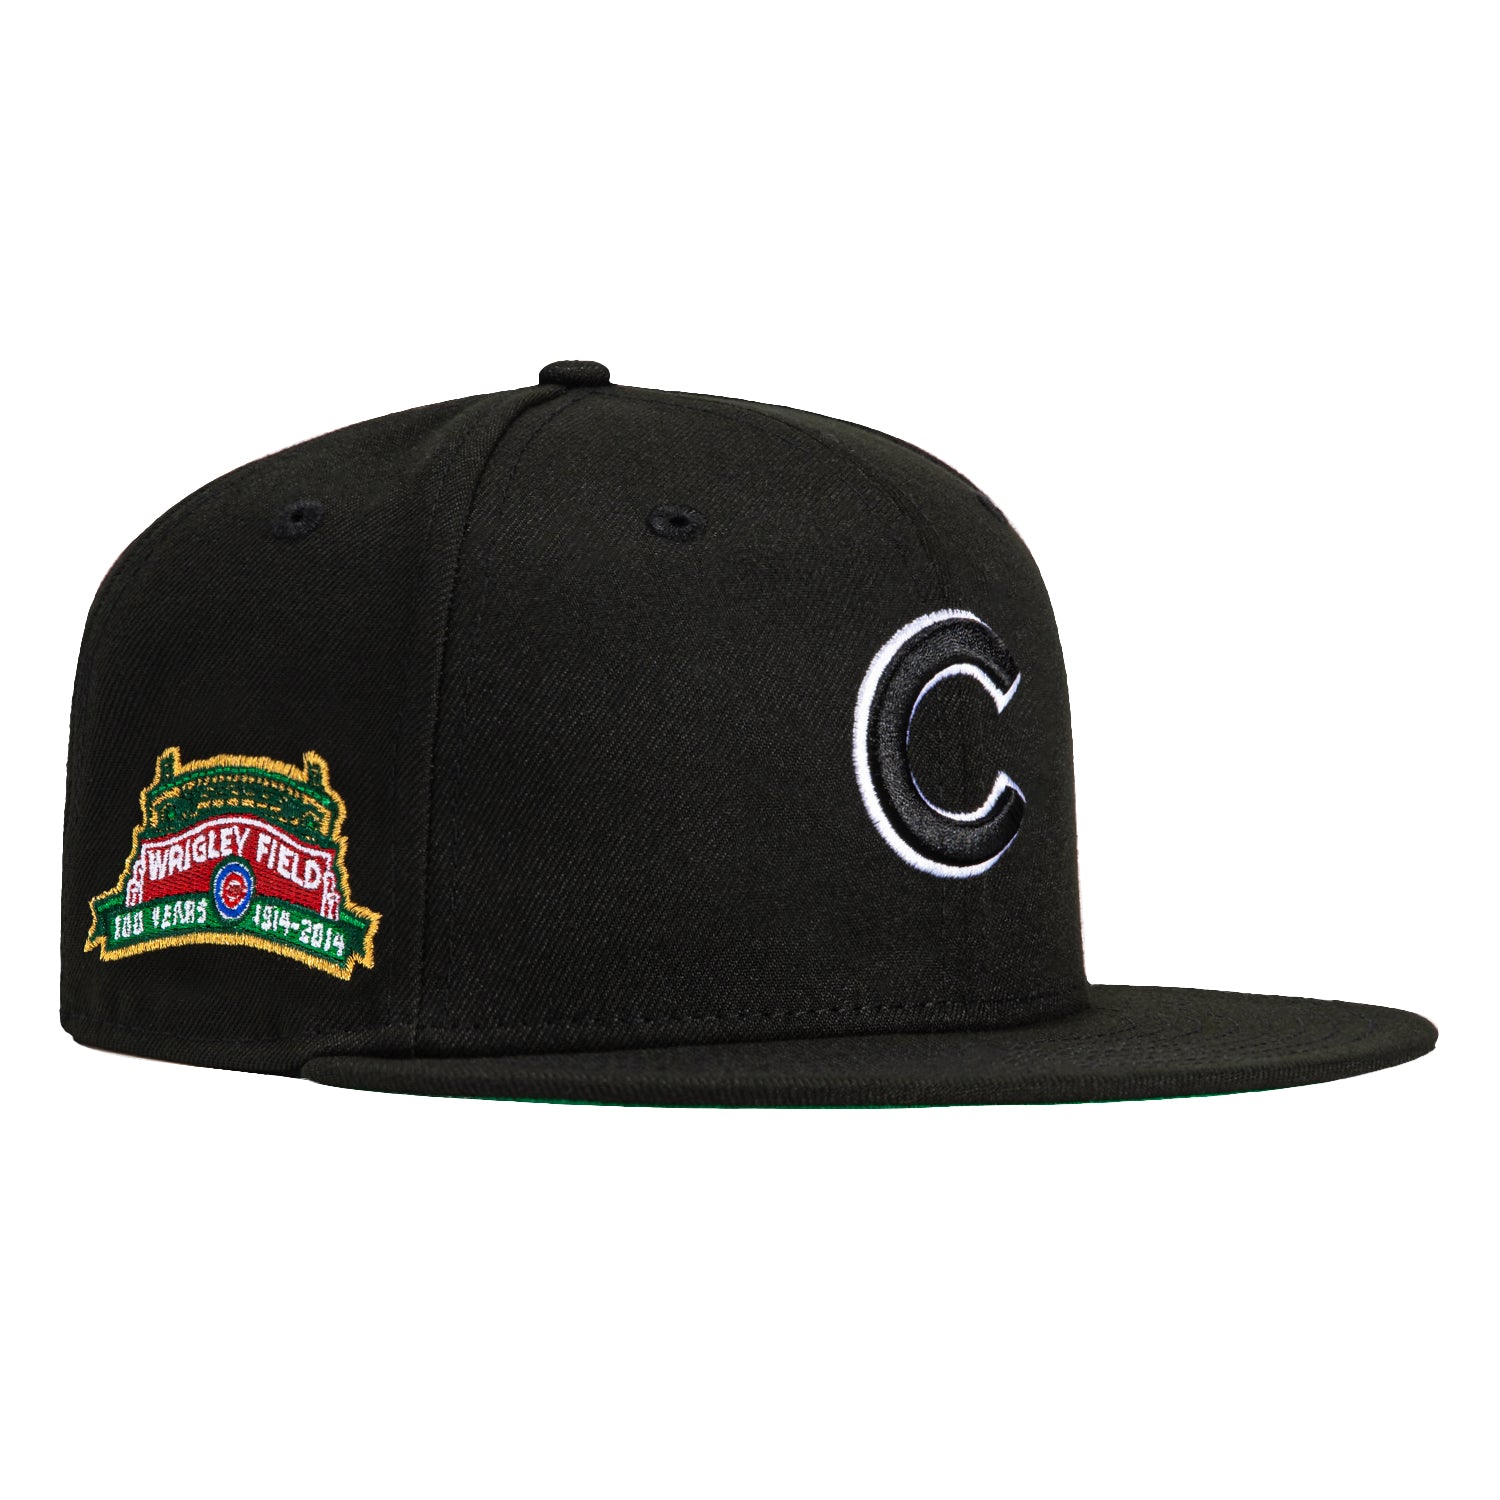 New Era 59Fifty Chicago Cubs Wrigley Field Patch Hat - Black, White ...